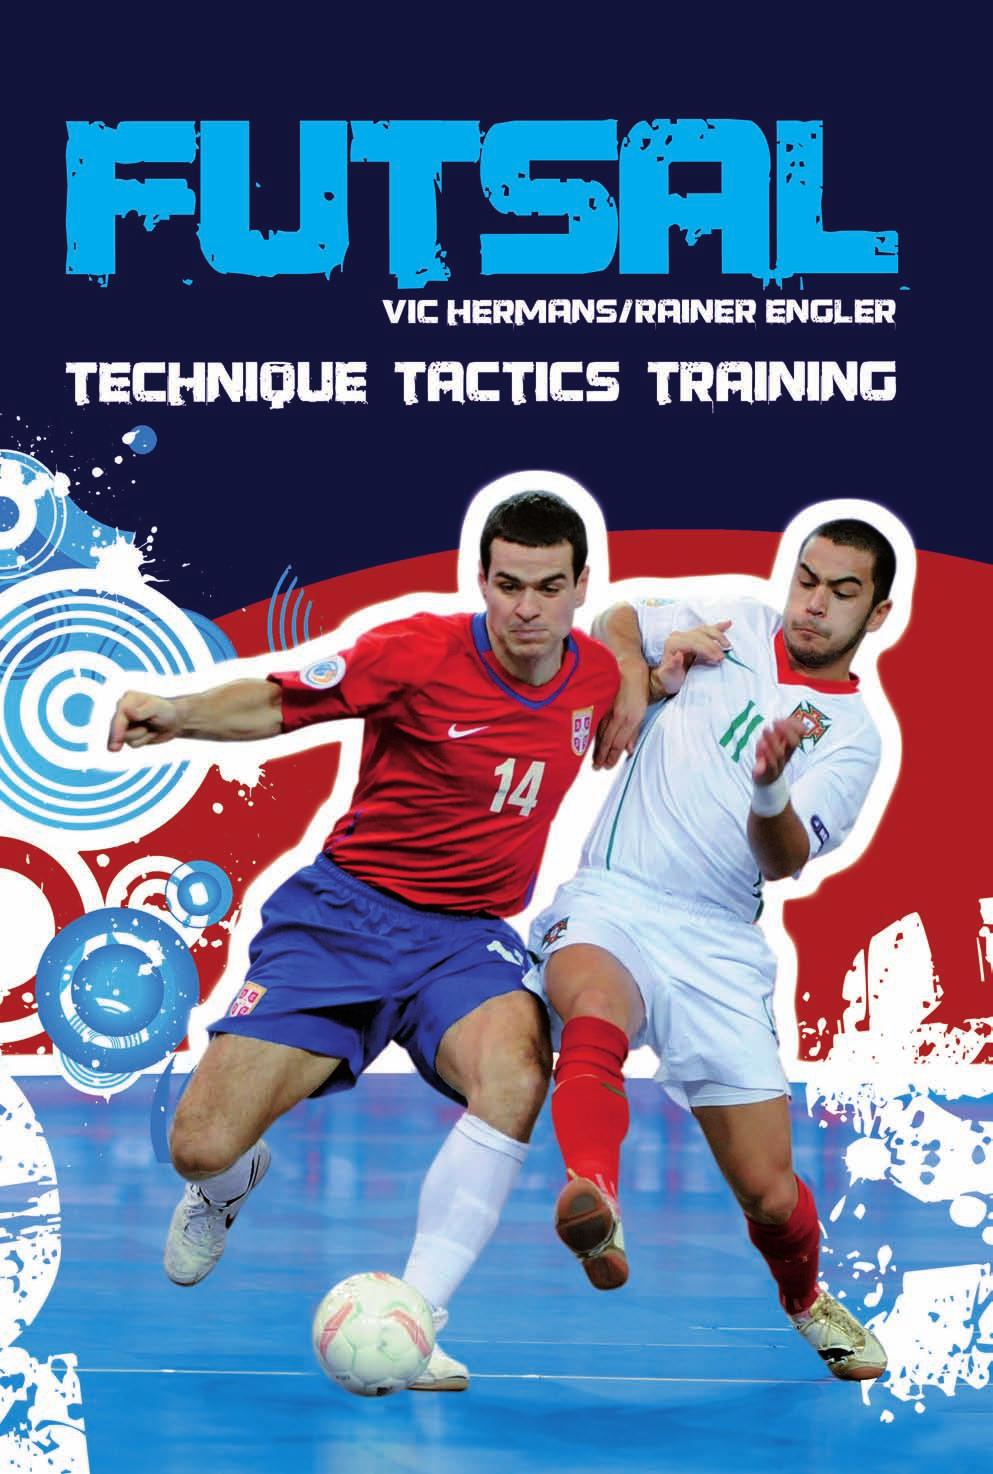 The book gives a comprehensive overview of the history of Futsal, its greatest moments and its contribution to the development of soccer idols like